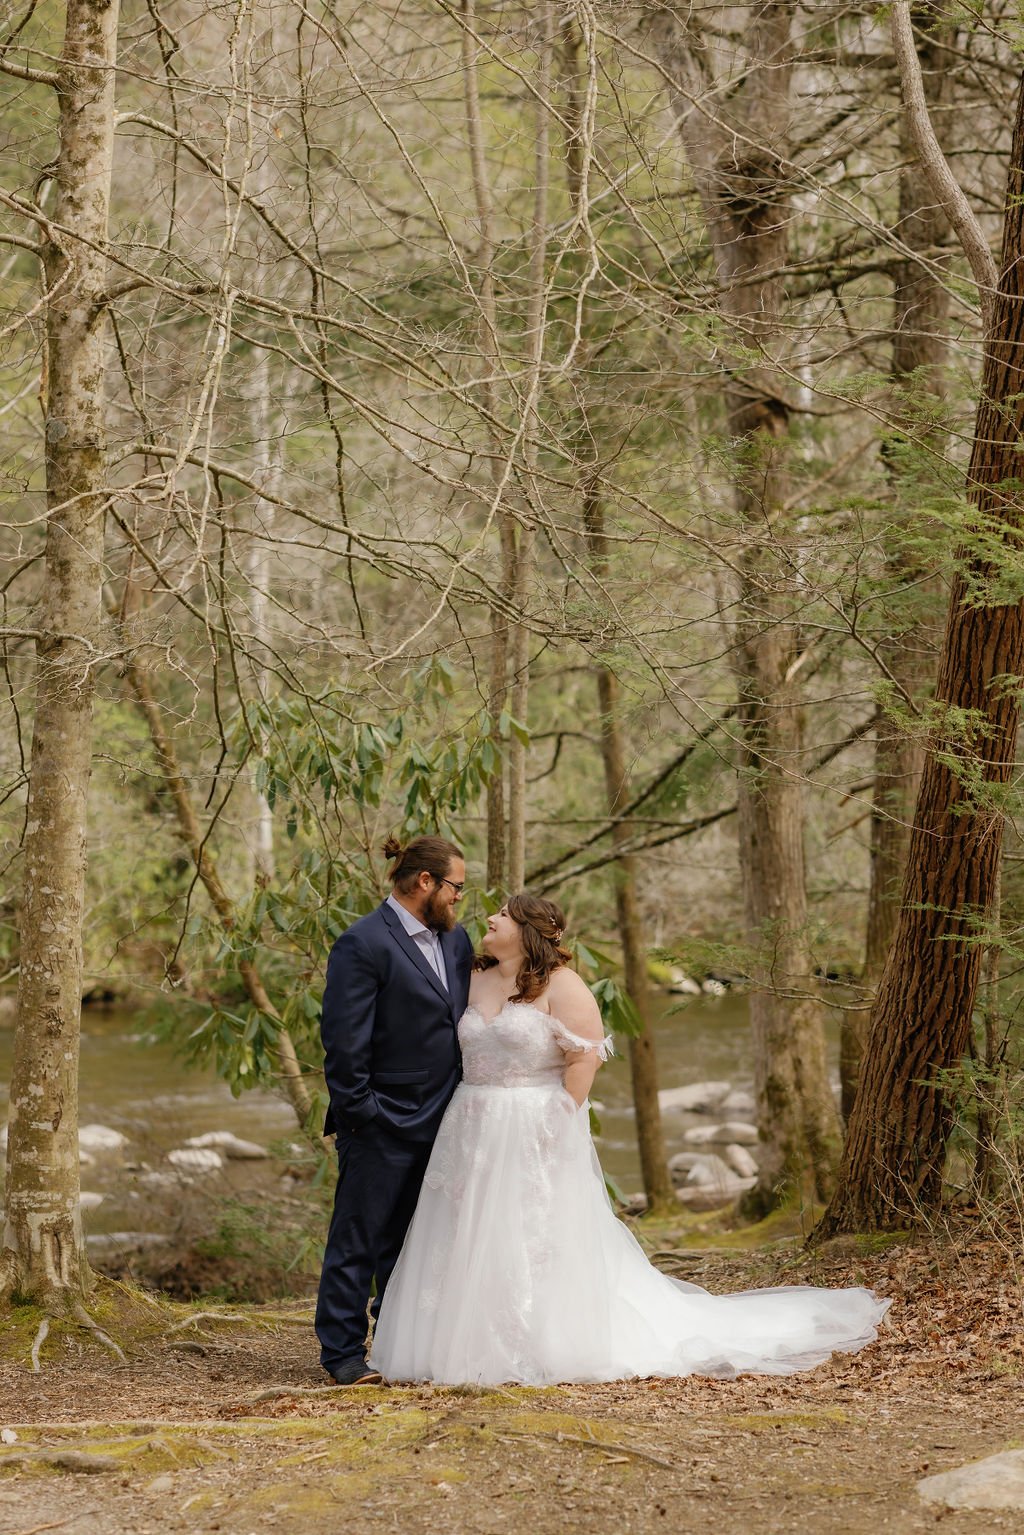 gatlinburg-photographer-5-signs-you-may-want-to-elope-to-gatlinburg-bride-groom-in-forest